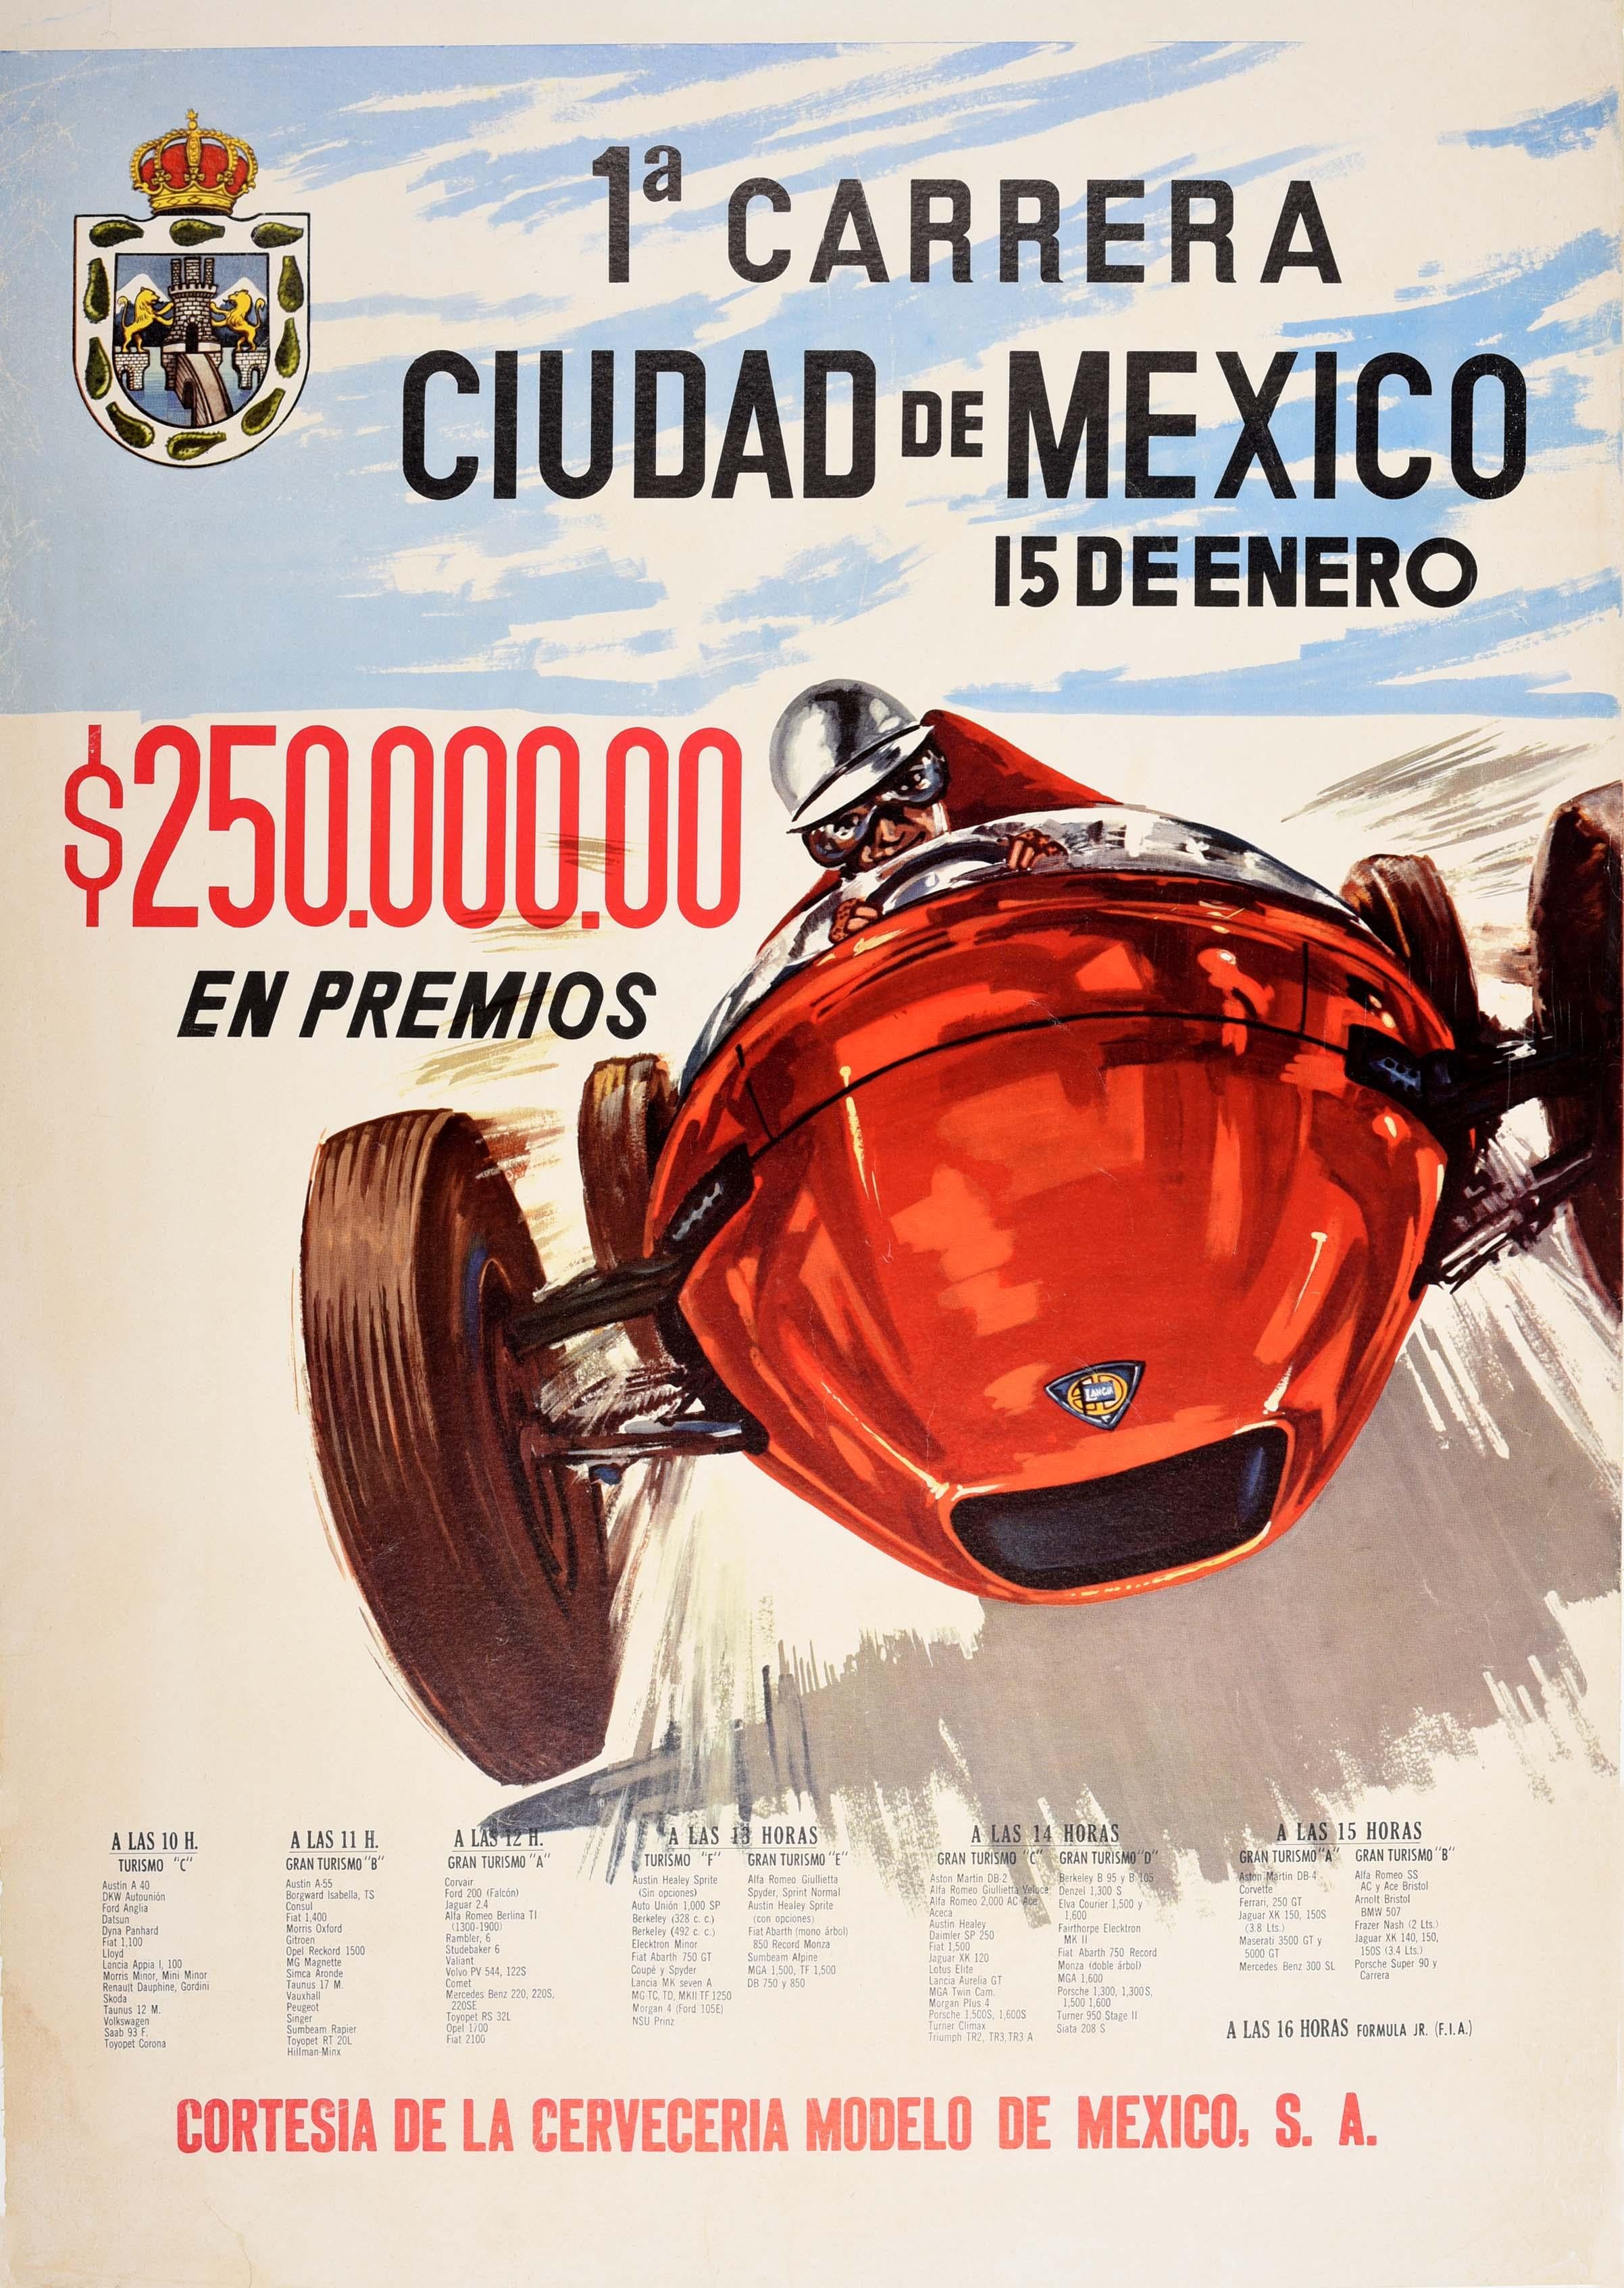 Original vintage motorsport poster for the 1a Carrera Ciudad de Mexico 15 de Enero / 1st Mexico City Race on 15 January featuring a dynamic design showing a driver in a helmet and goggles racing a classic car at speed towards the viewer with the